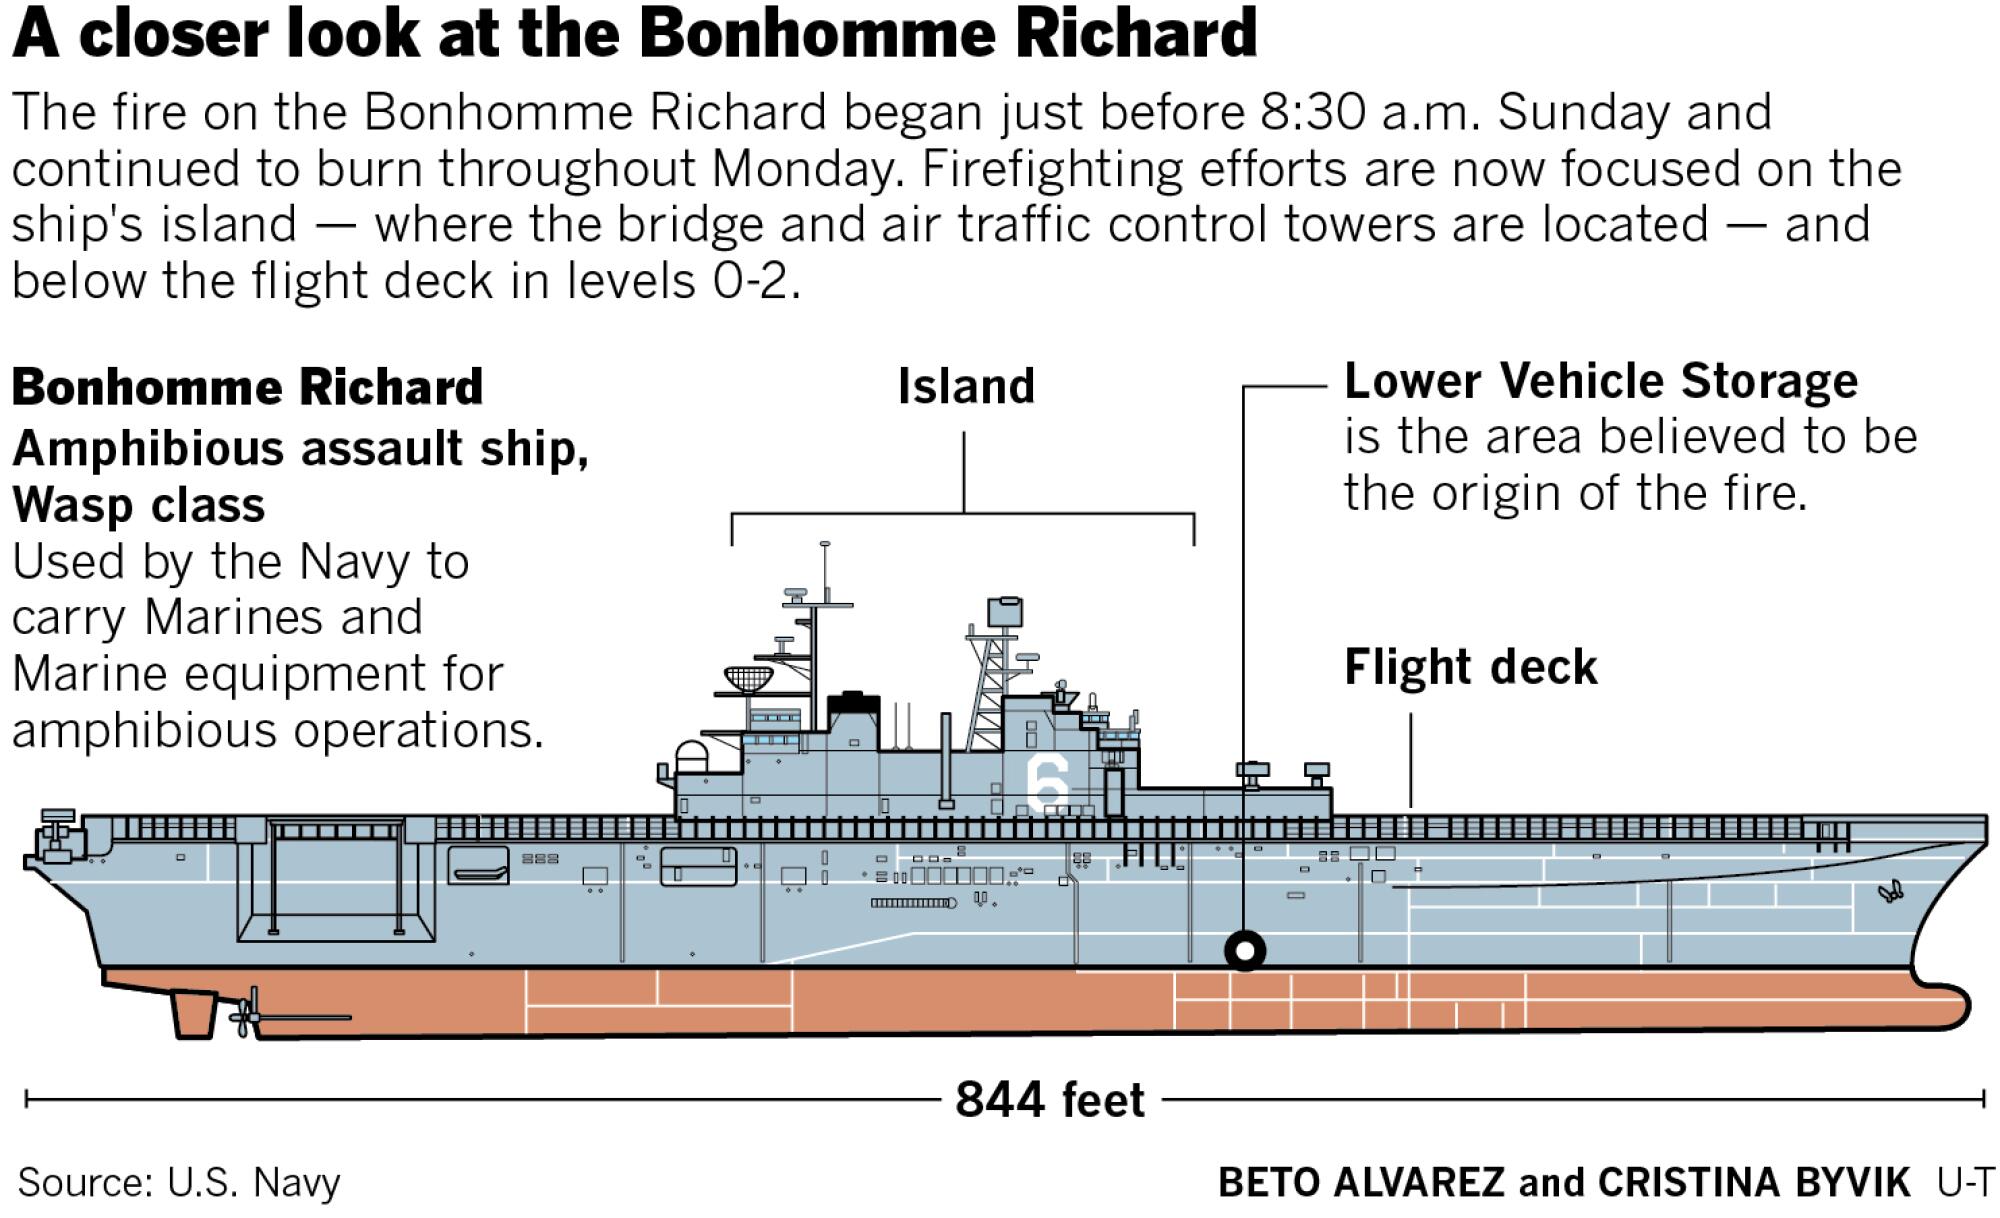 A schematic of the Bonhomme Richard